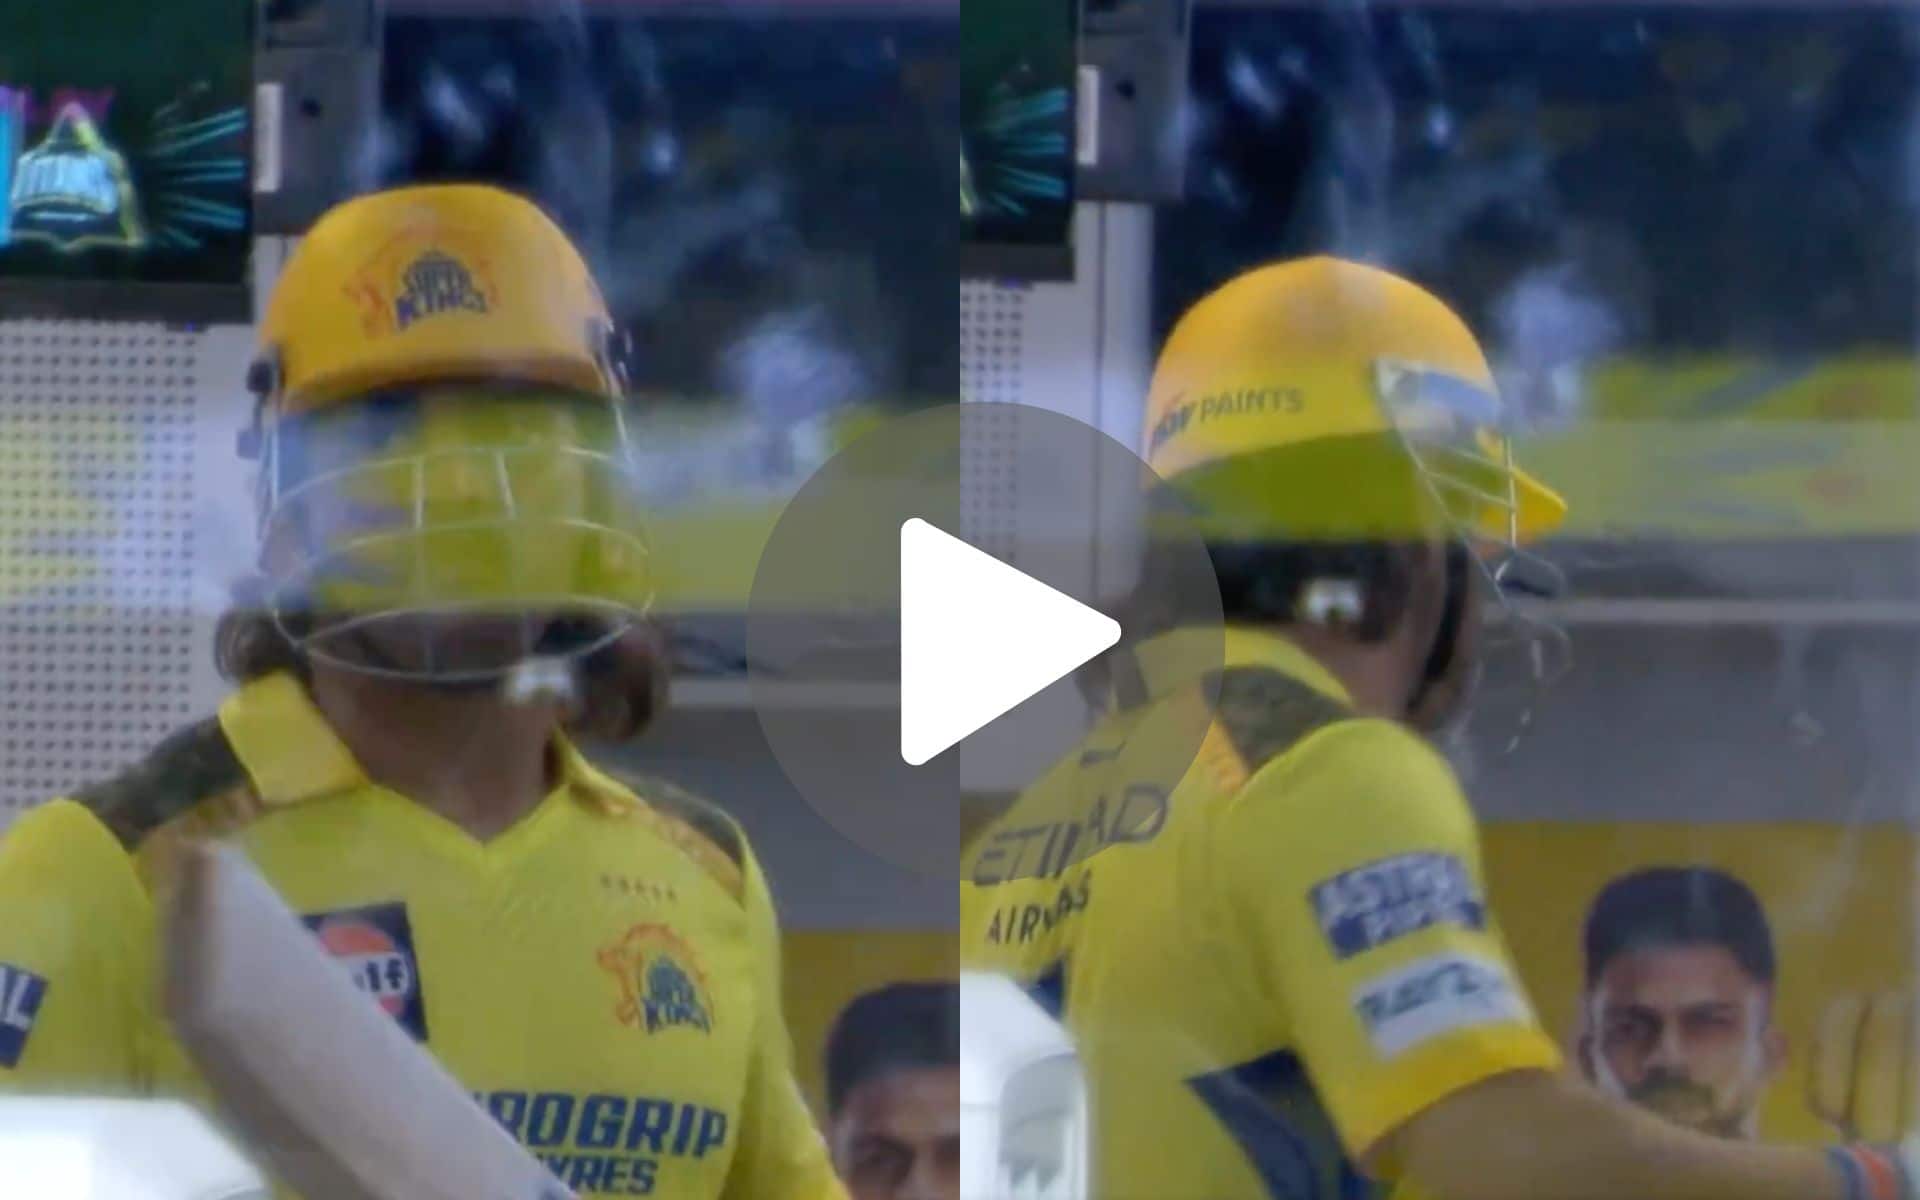 [Watch] MS Dhoni ‘Upset’ While Returning To Dressing Room After Helmet, Gloves & Pads On